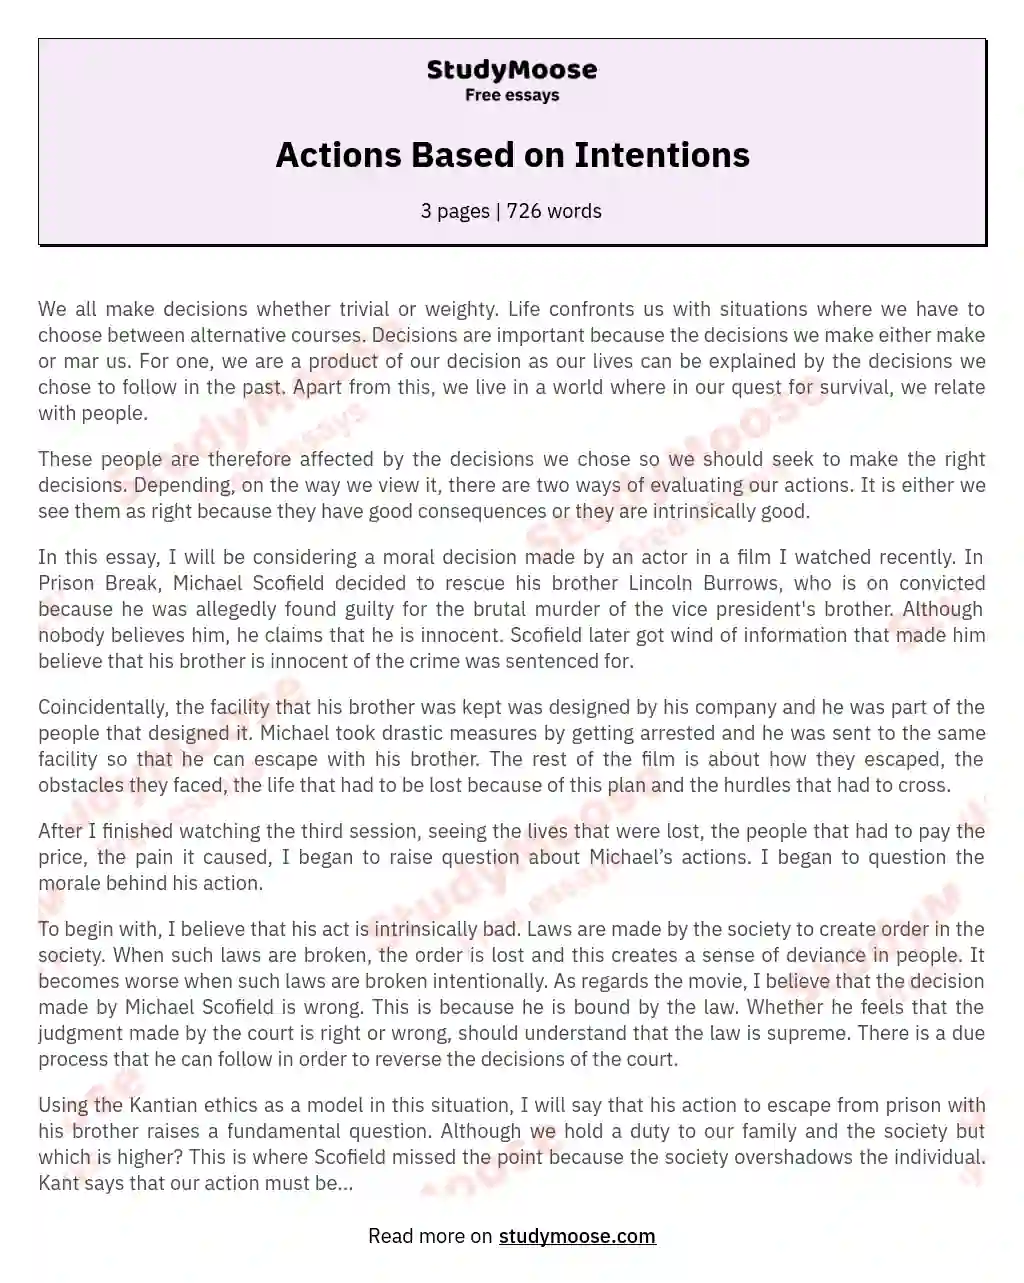 Actions Based on Intentions essay